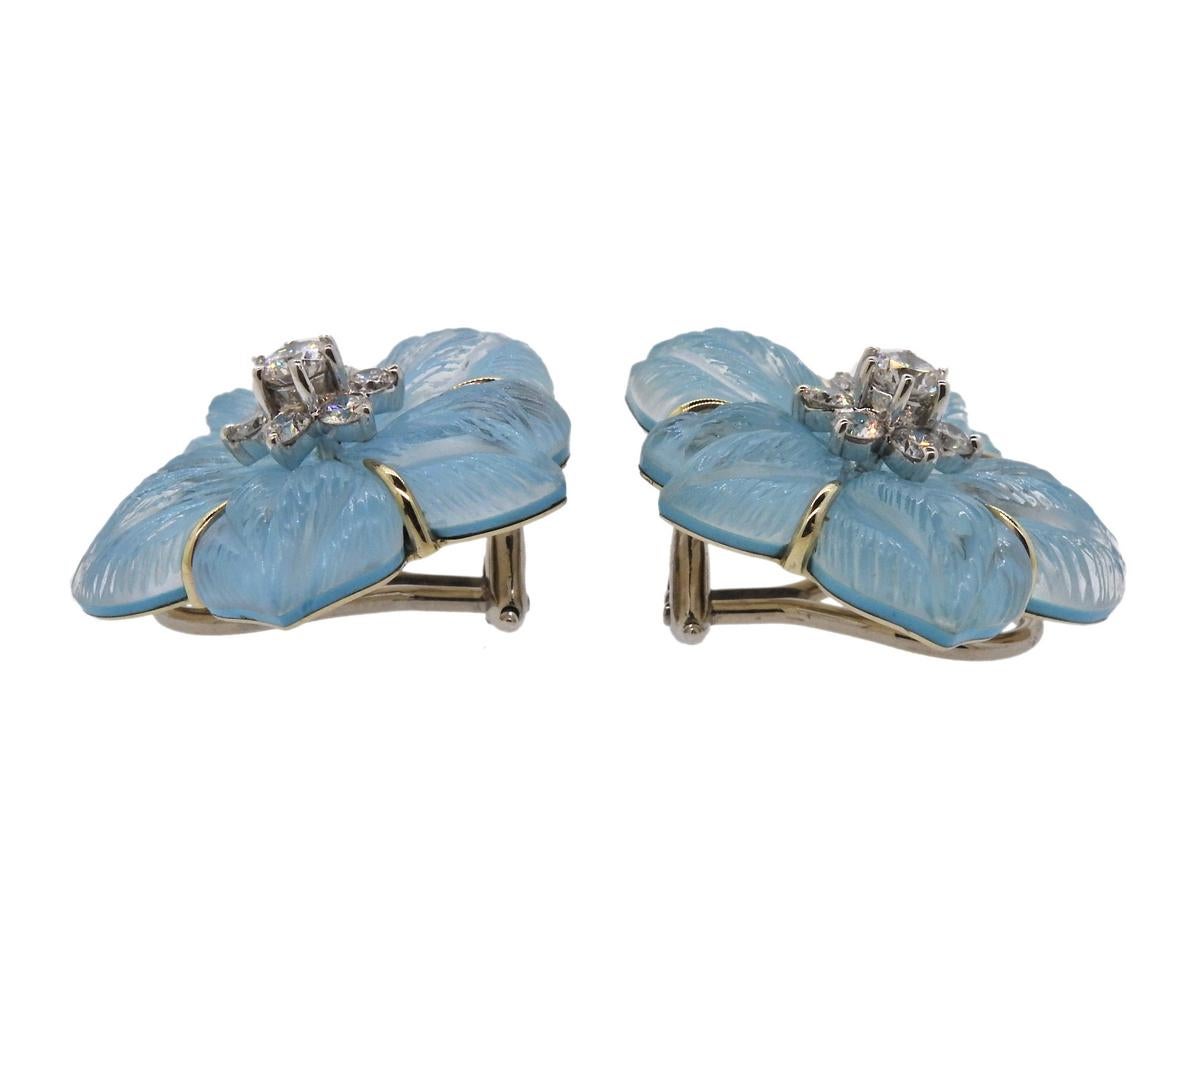  Delicate 18k gold Clematis flower earrings by Seaman Schepps, decorated with turquoise and carved crystal petals, and approx. 0.78ctw in G/Vs diamonds in the center. Come with box.  Earrings are 25mm x 25.5mm, weigh 15 grams. Marked: Seaman